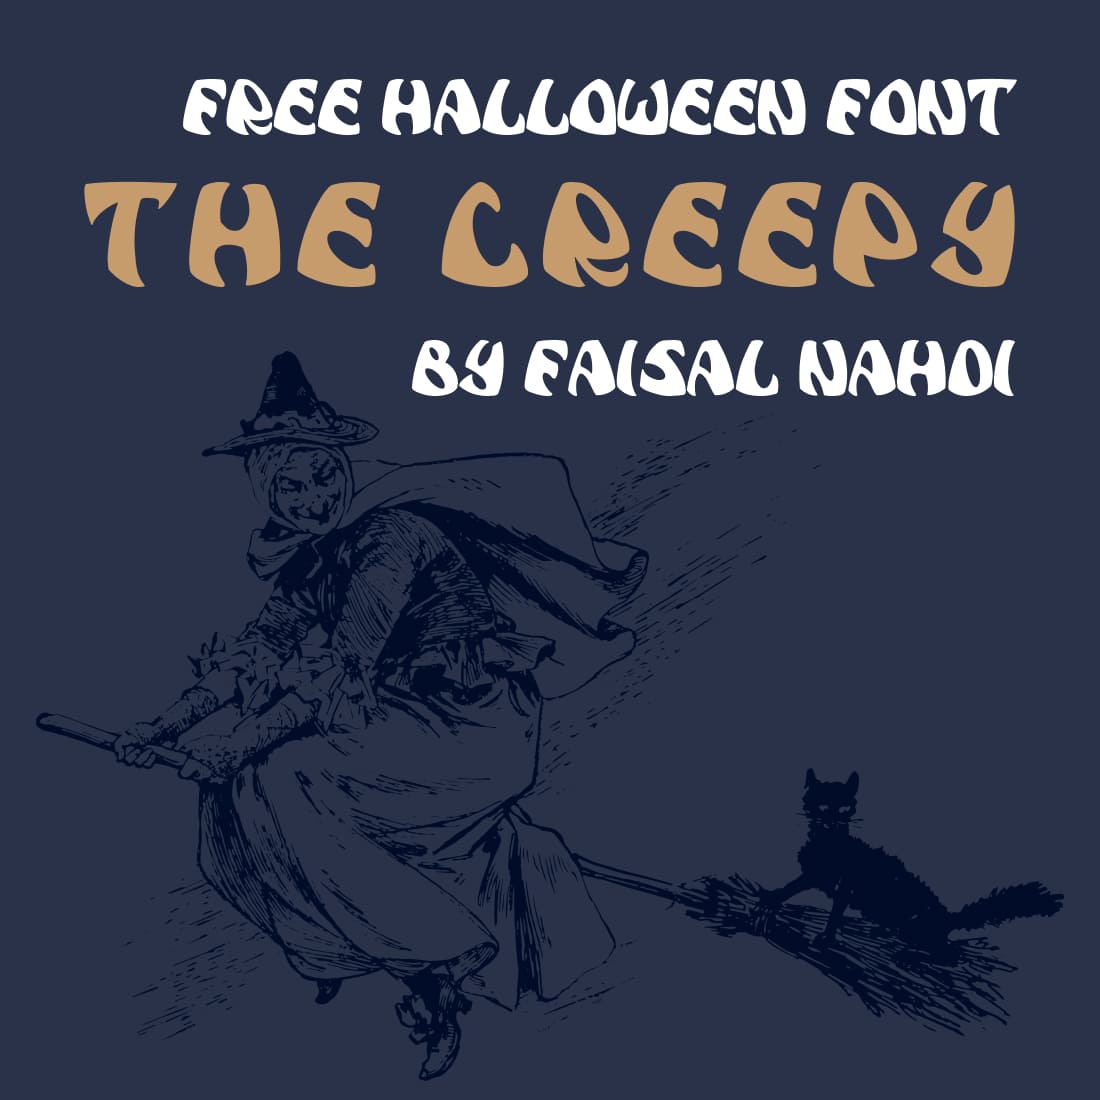 With this font and illustrations, it's the perfect Halloween composition.